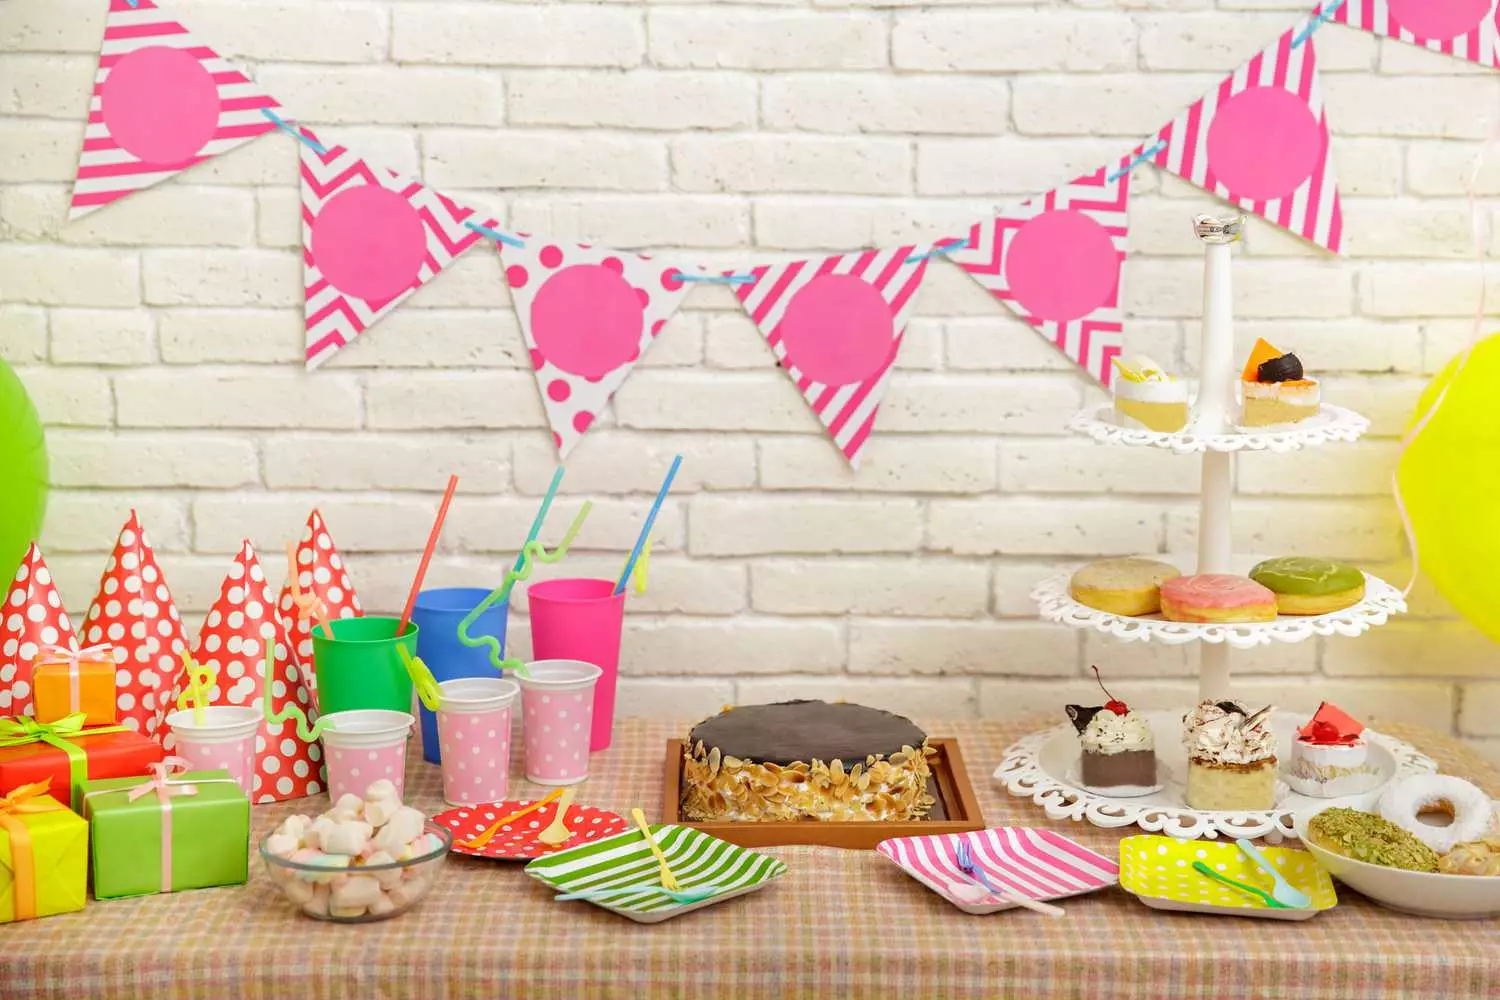 Top 10 Birthday Party Snack Ideas for Kids